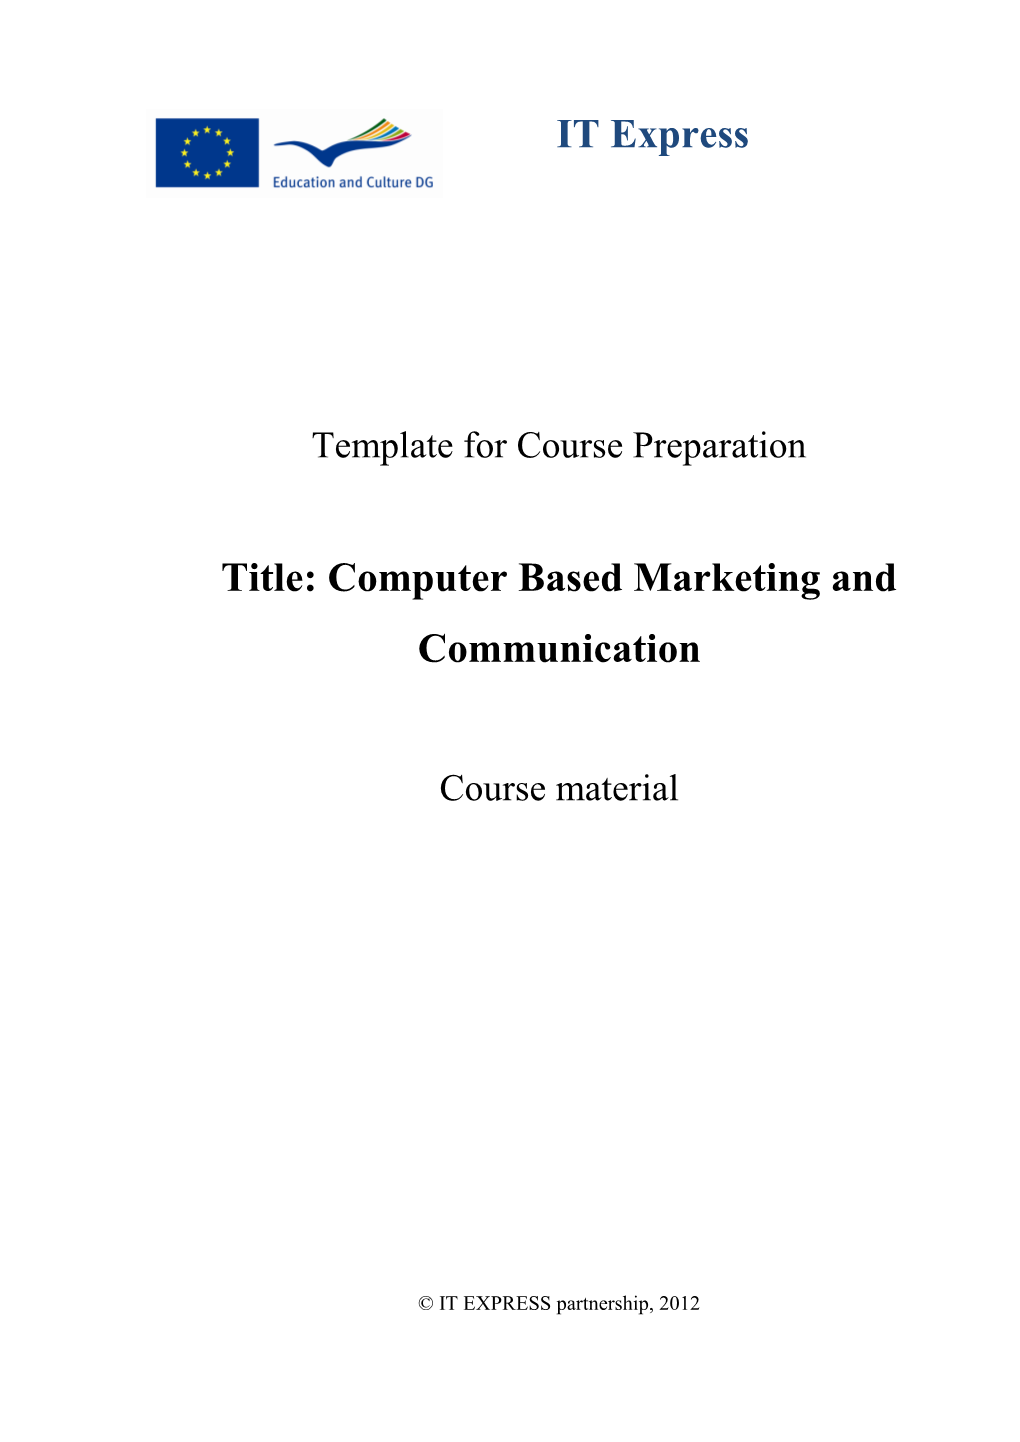 IT Express Title: Computer Based Marketing and Communication